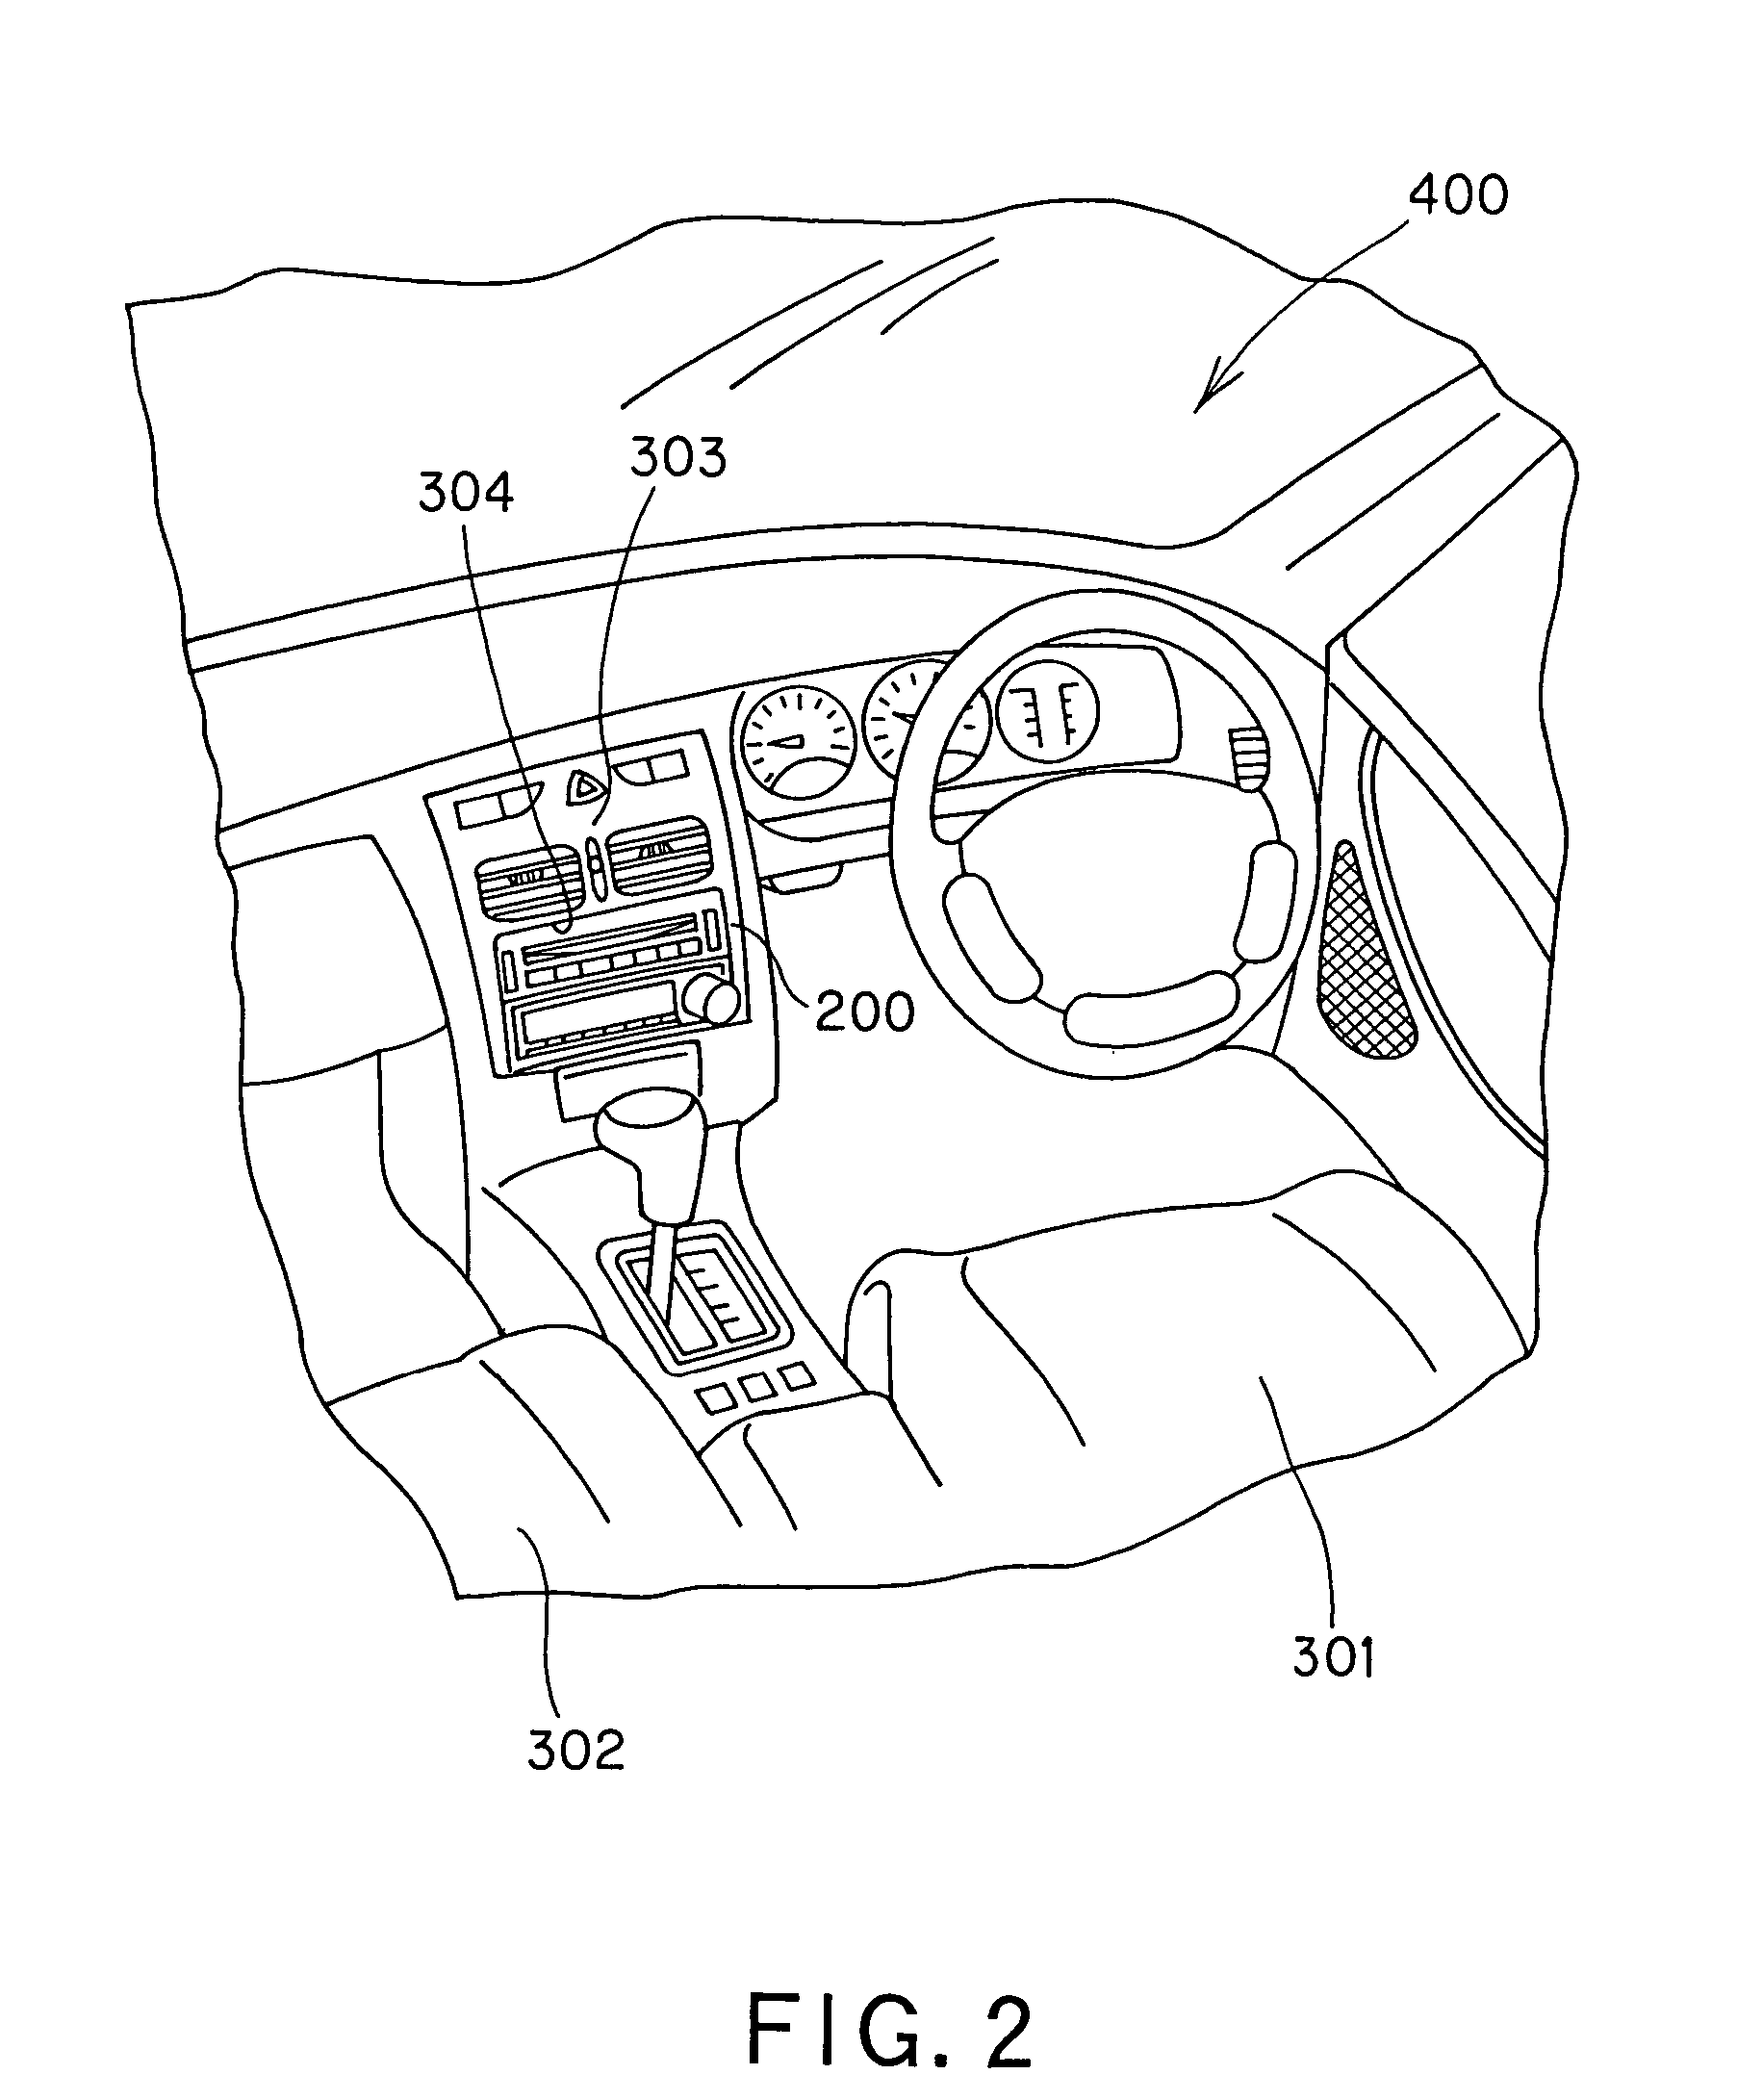 In-vehicle player